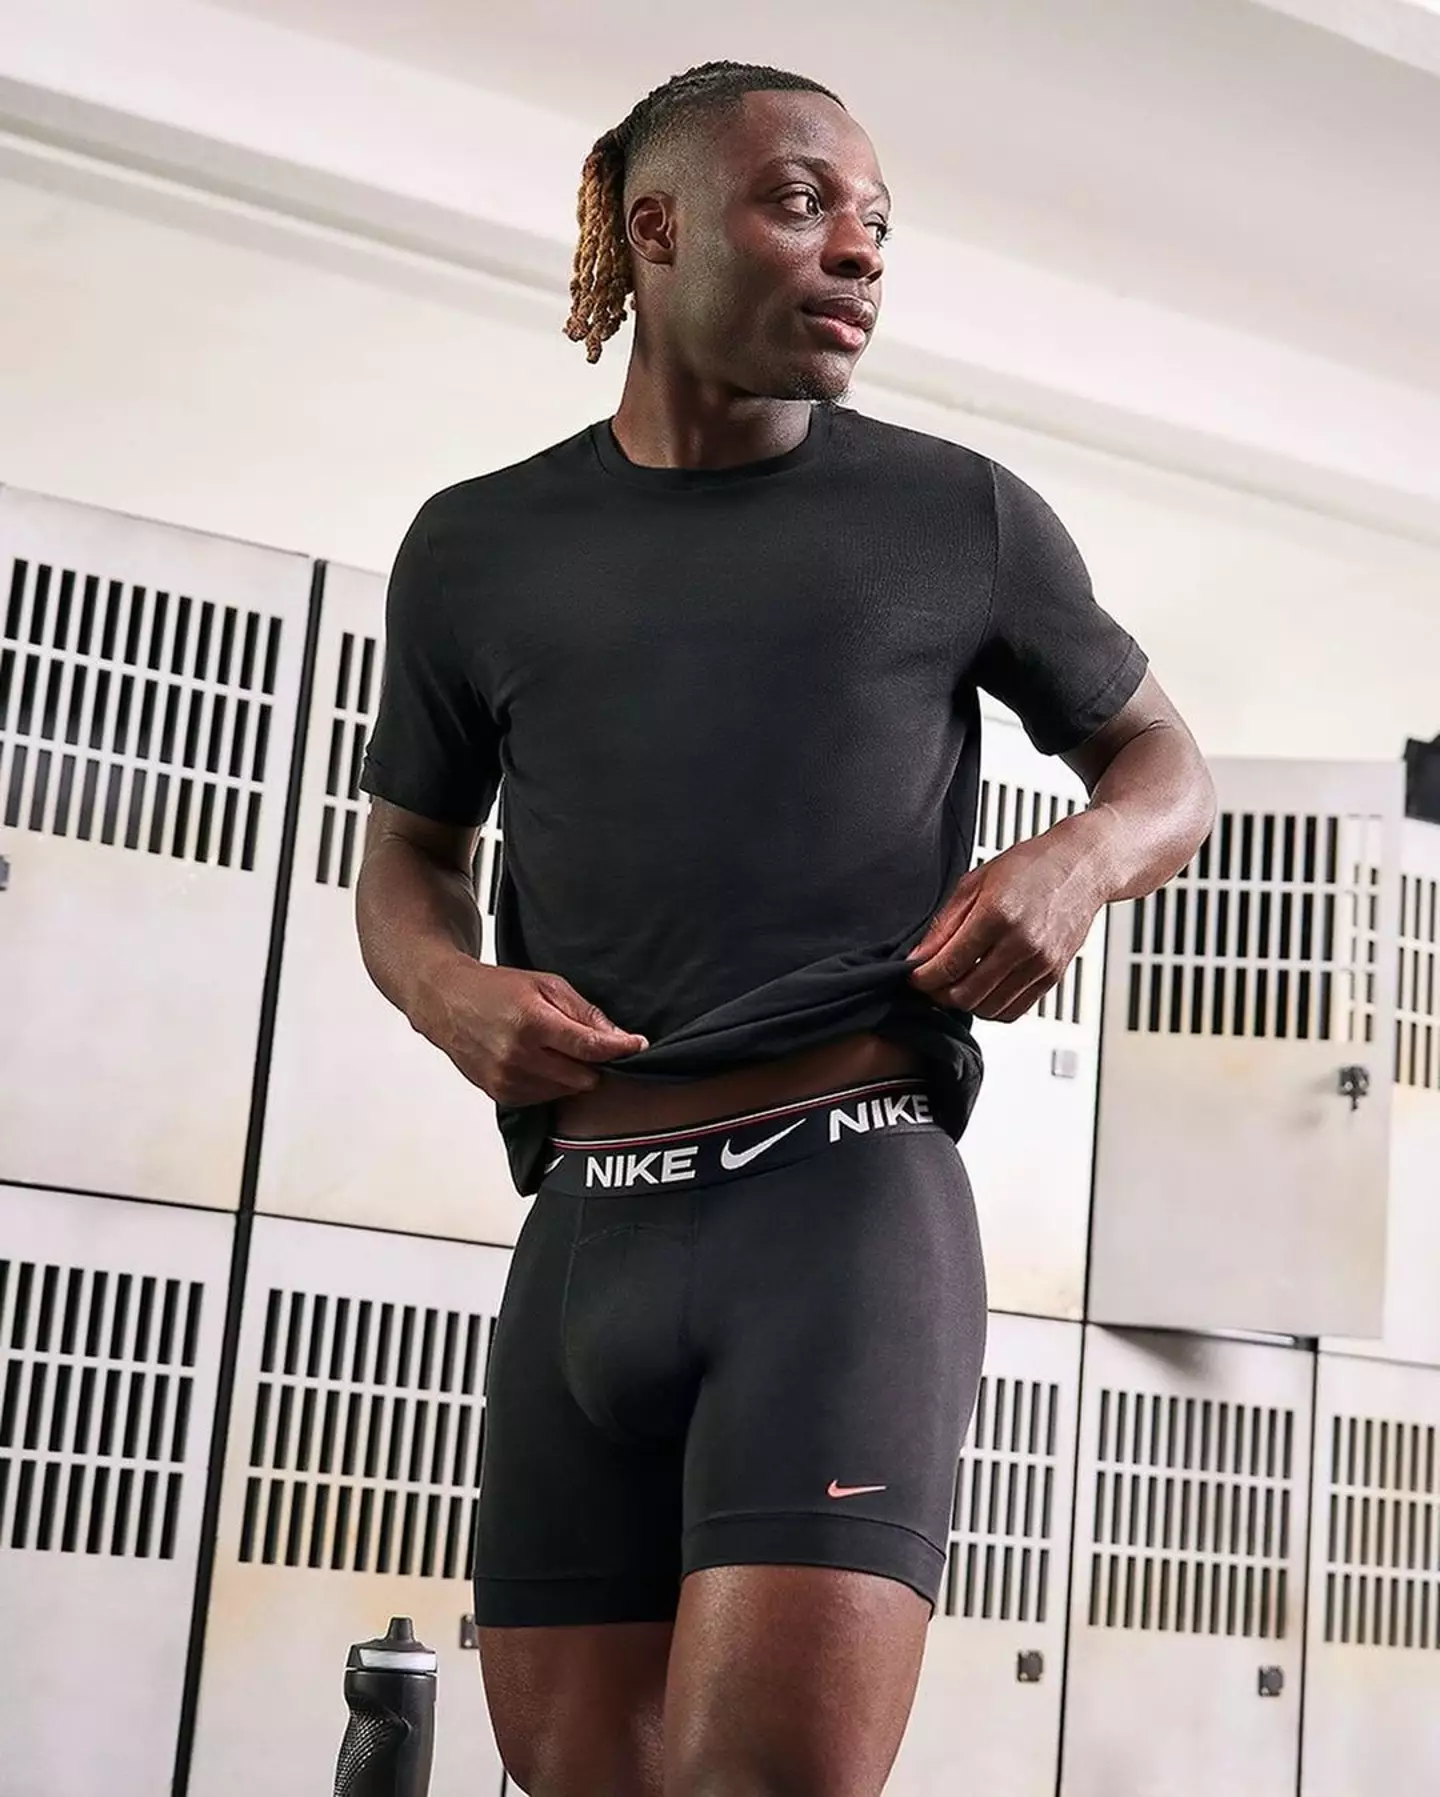 Jeremy Doku is the face of Nike Underwear's latest collection. Image credit: Nike